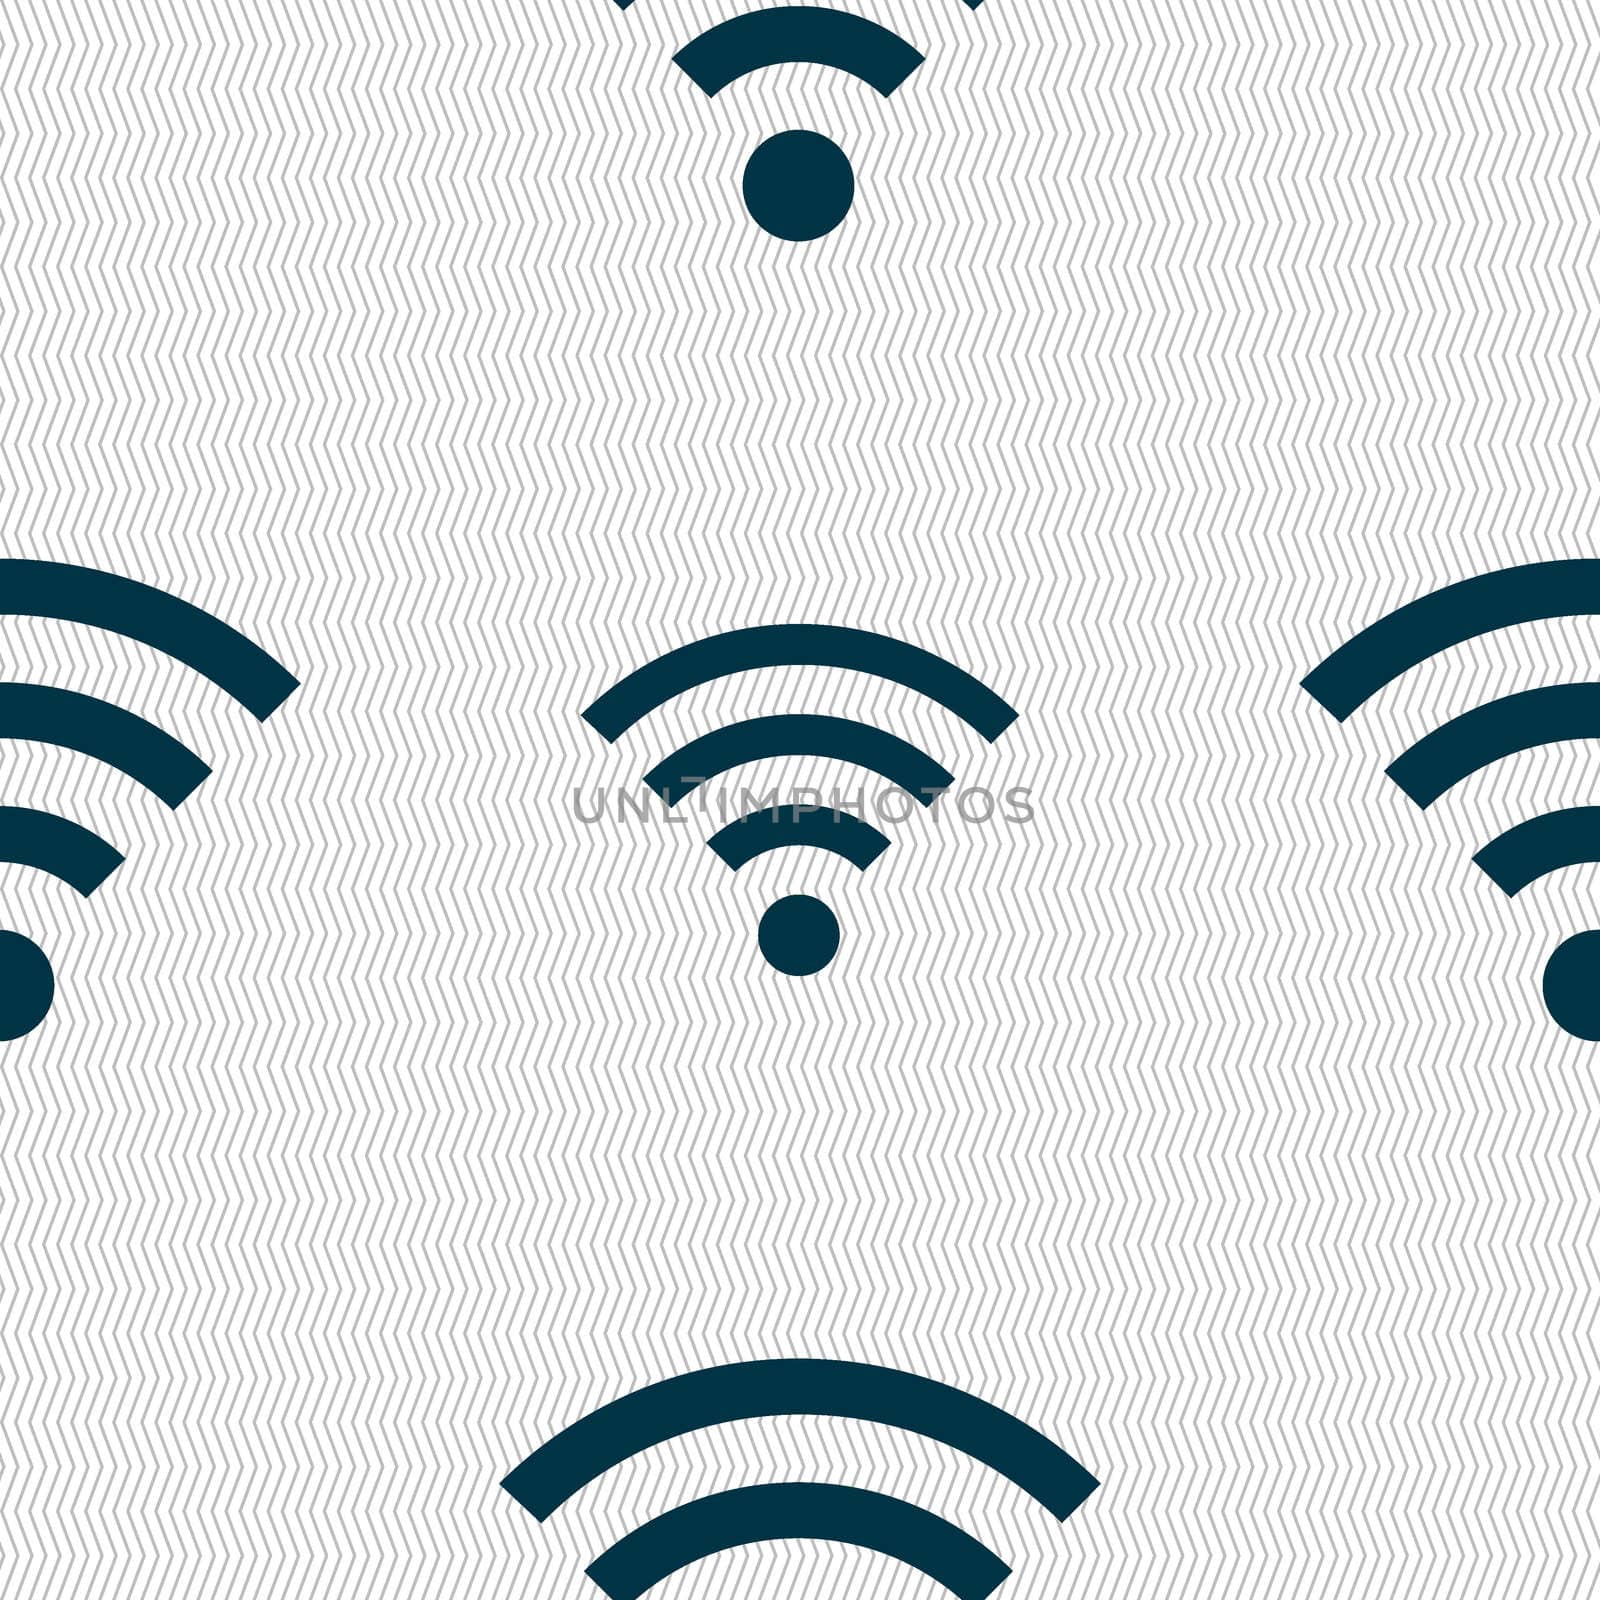 Wifi sign. Wi-fi symbol. Wireless Network icon zone. Seamless abstract background with geometric shapes.  by serhii_lohvyniuk